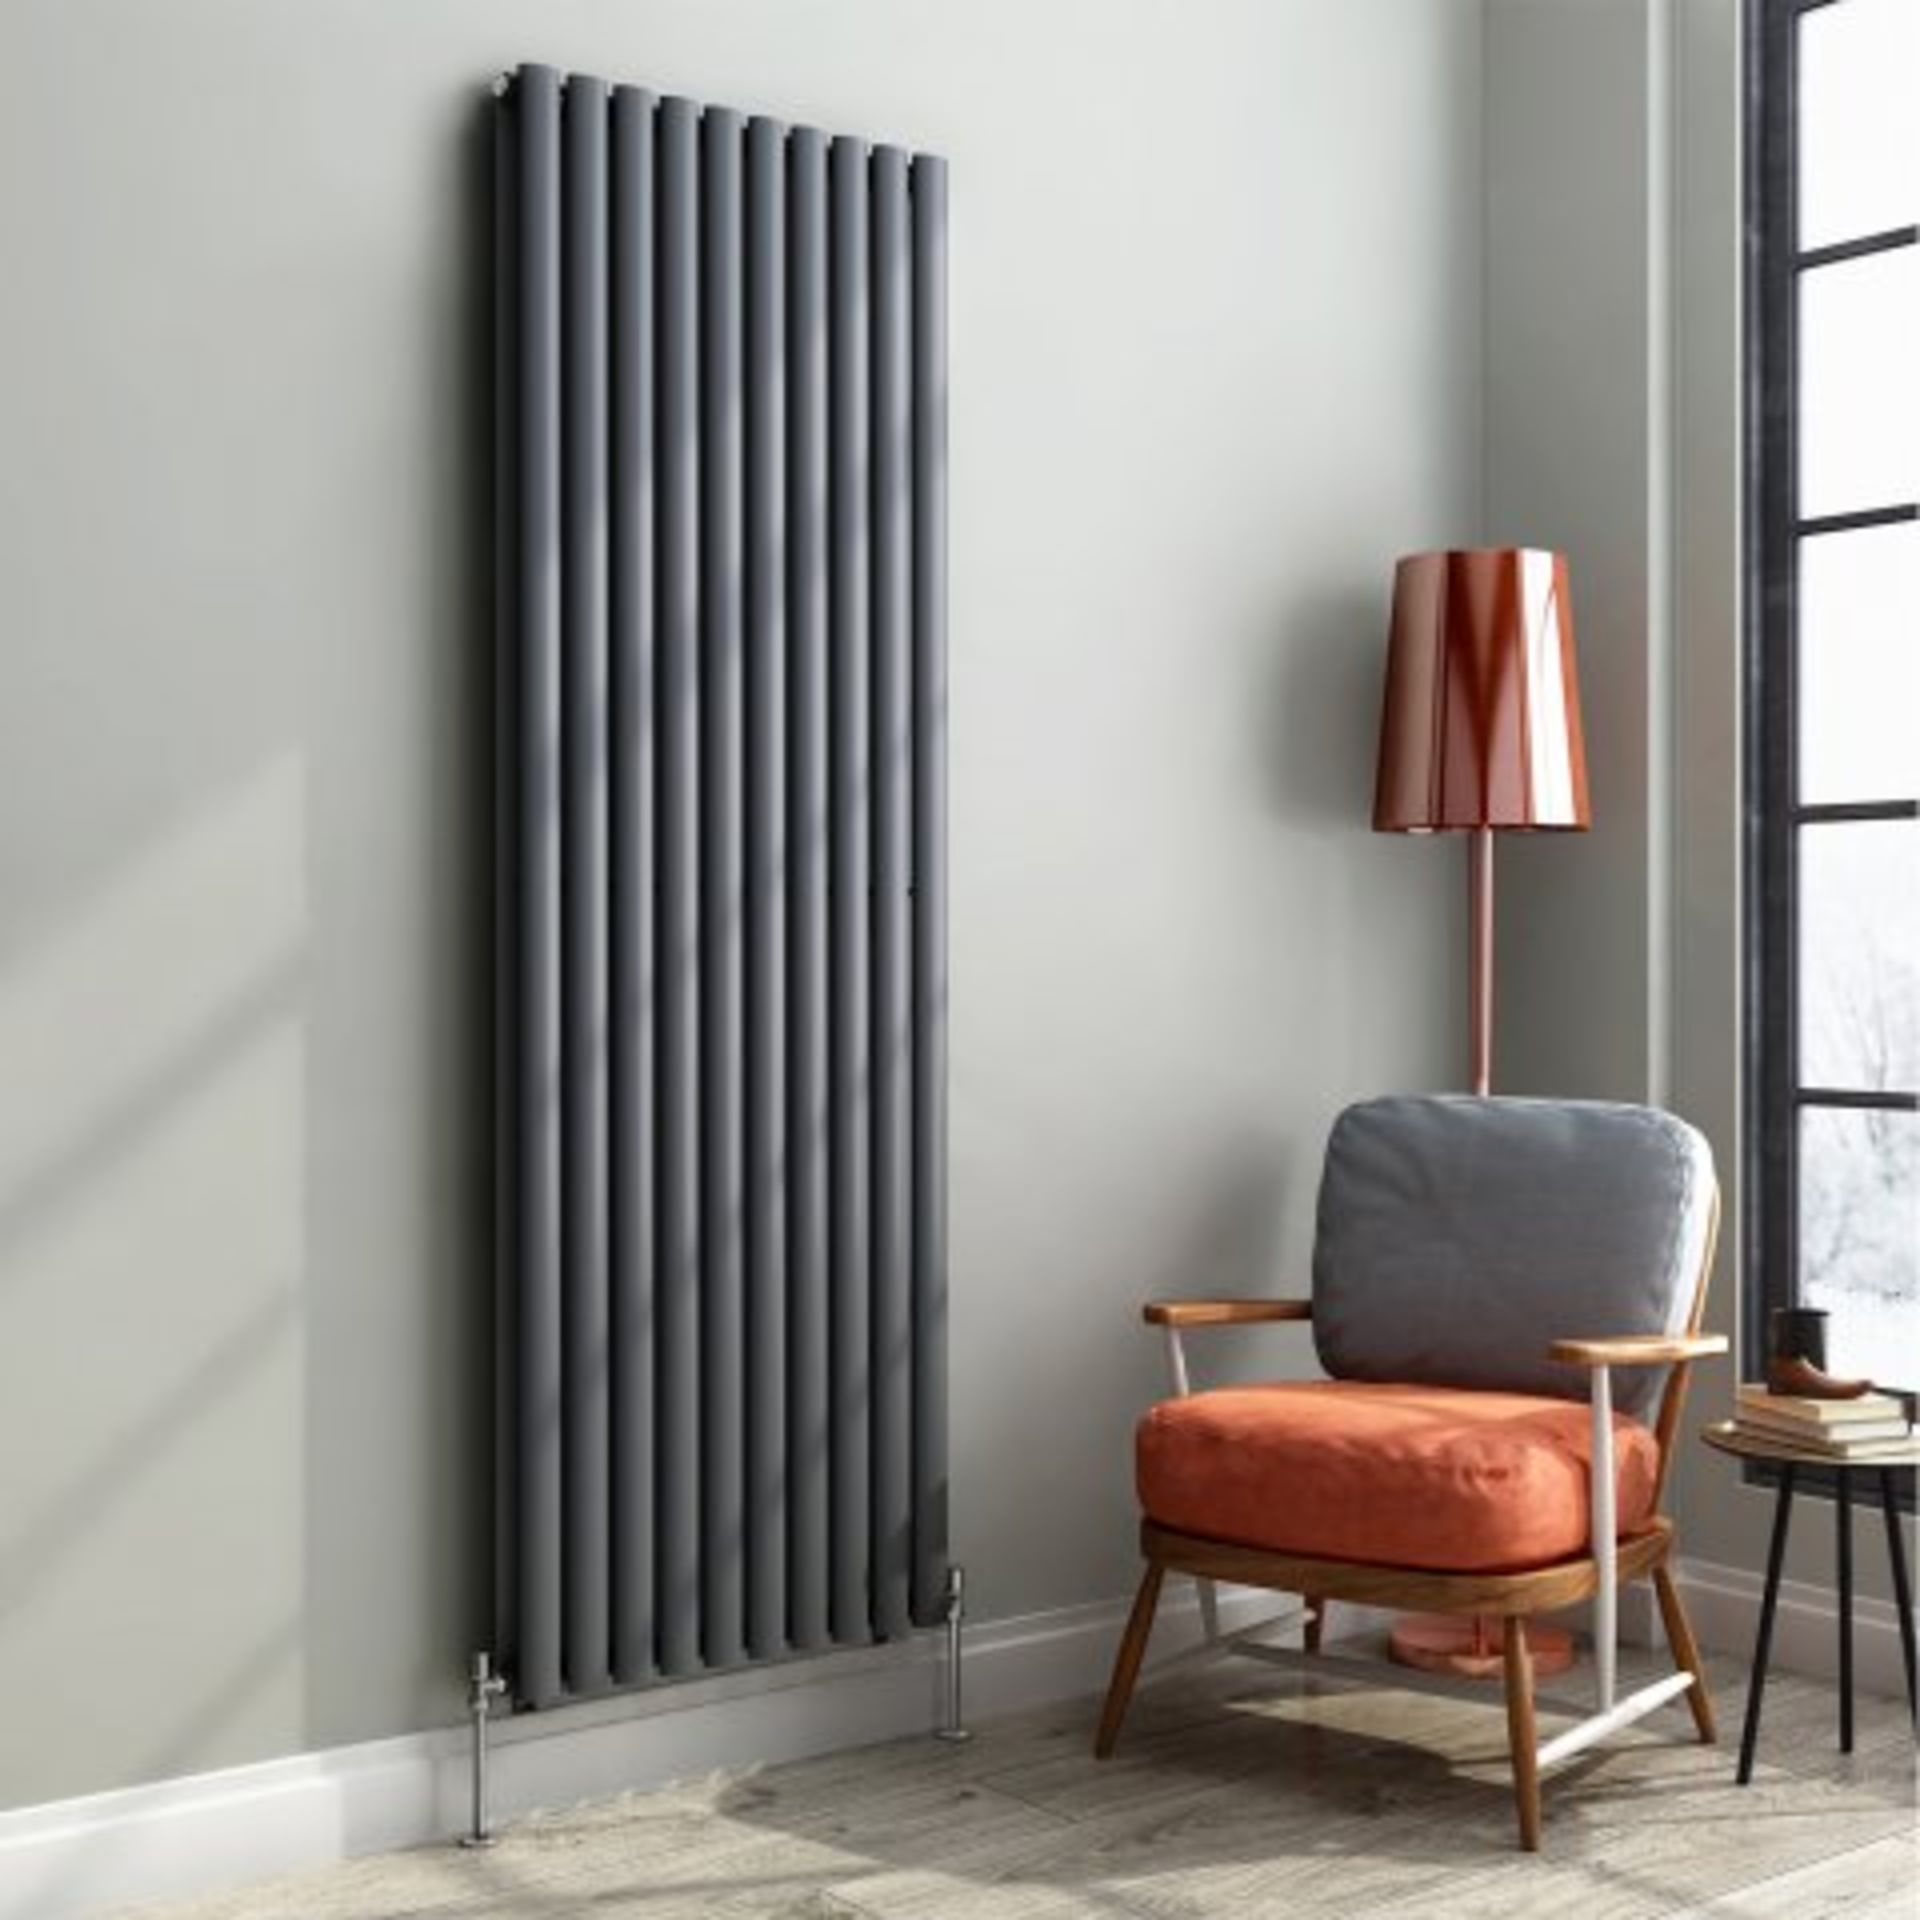 (AA5) 1800x600m Anthracite Double Panel Oval Tube Vertical Radiator - Ember Premium. RRP £599.99. - Image 3 of 4